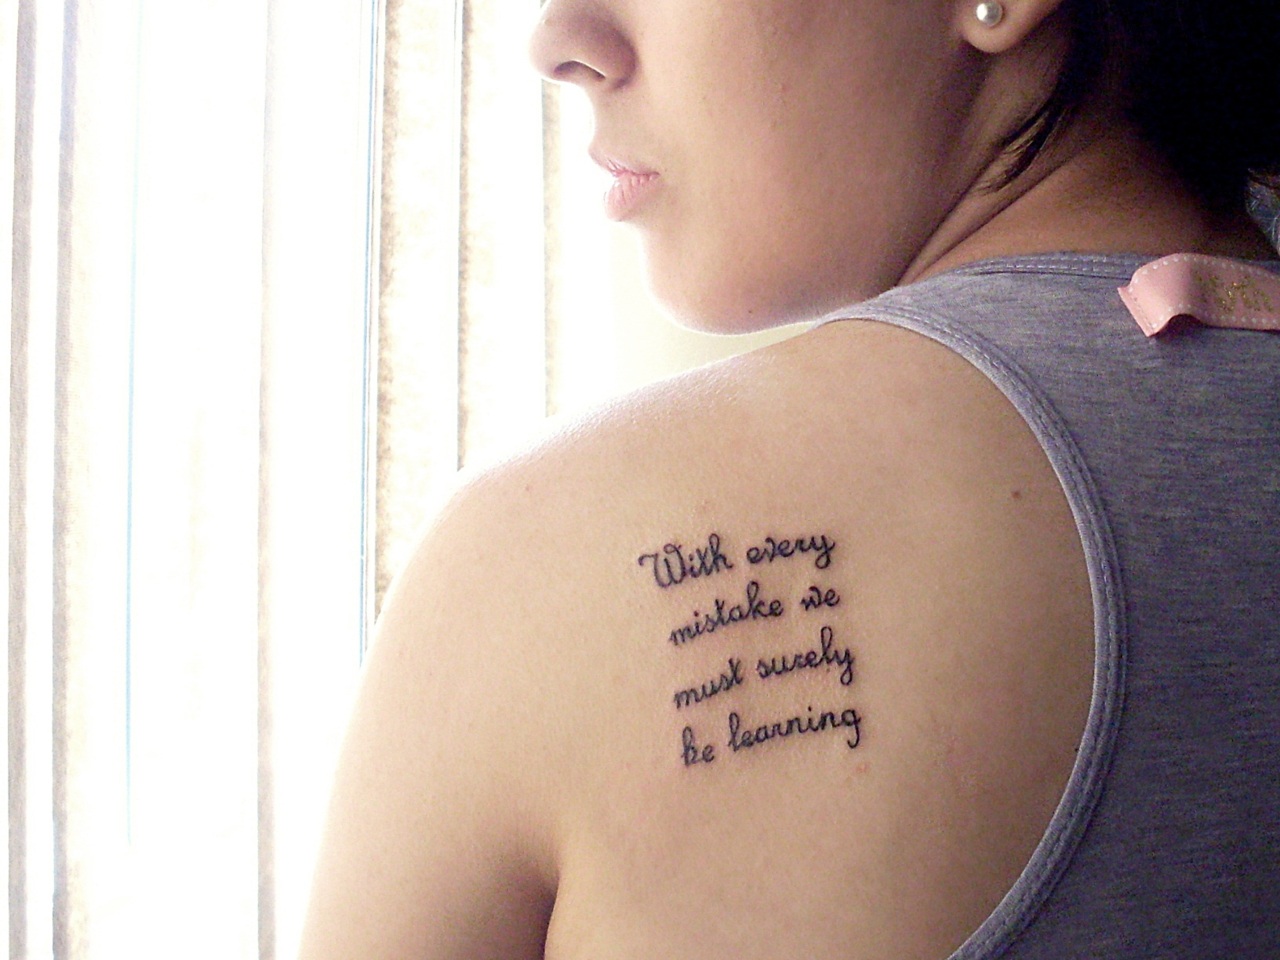 Quote Tattoos Designs, Ideas and Meaning  Tattoos For You